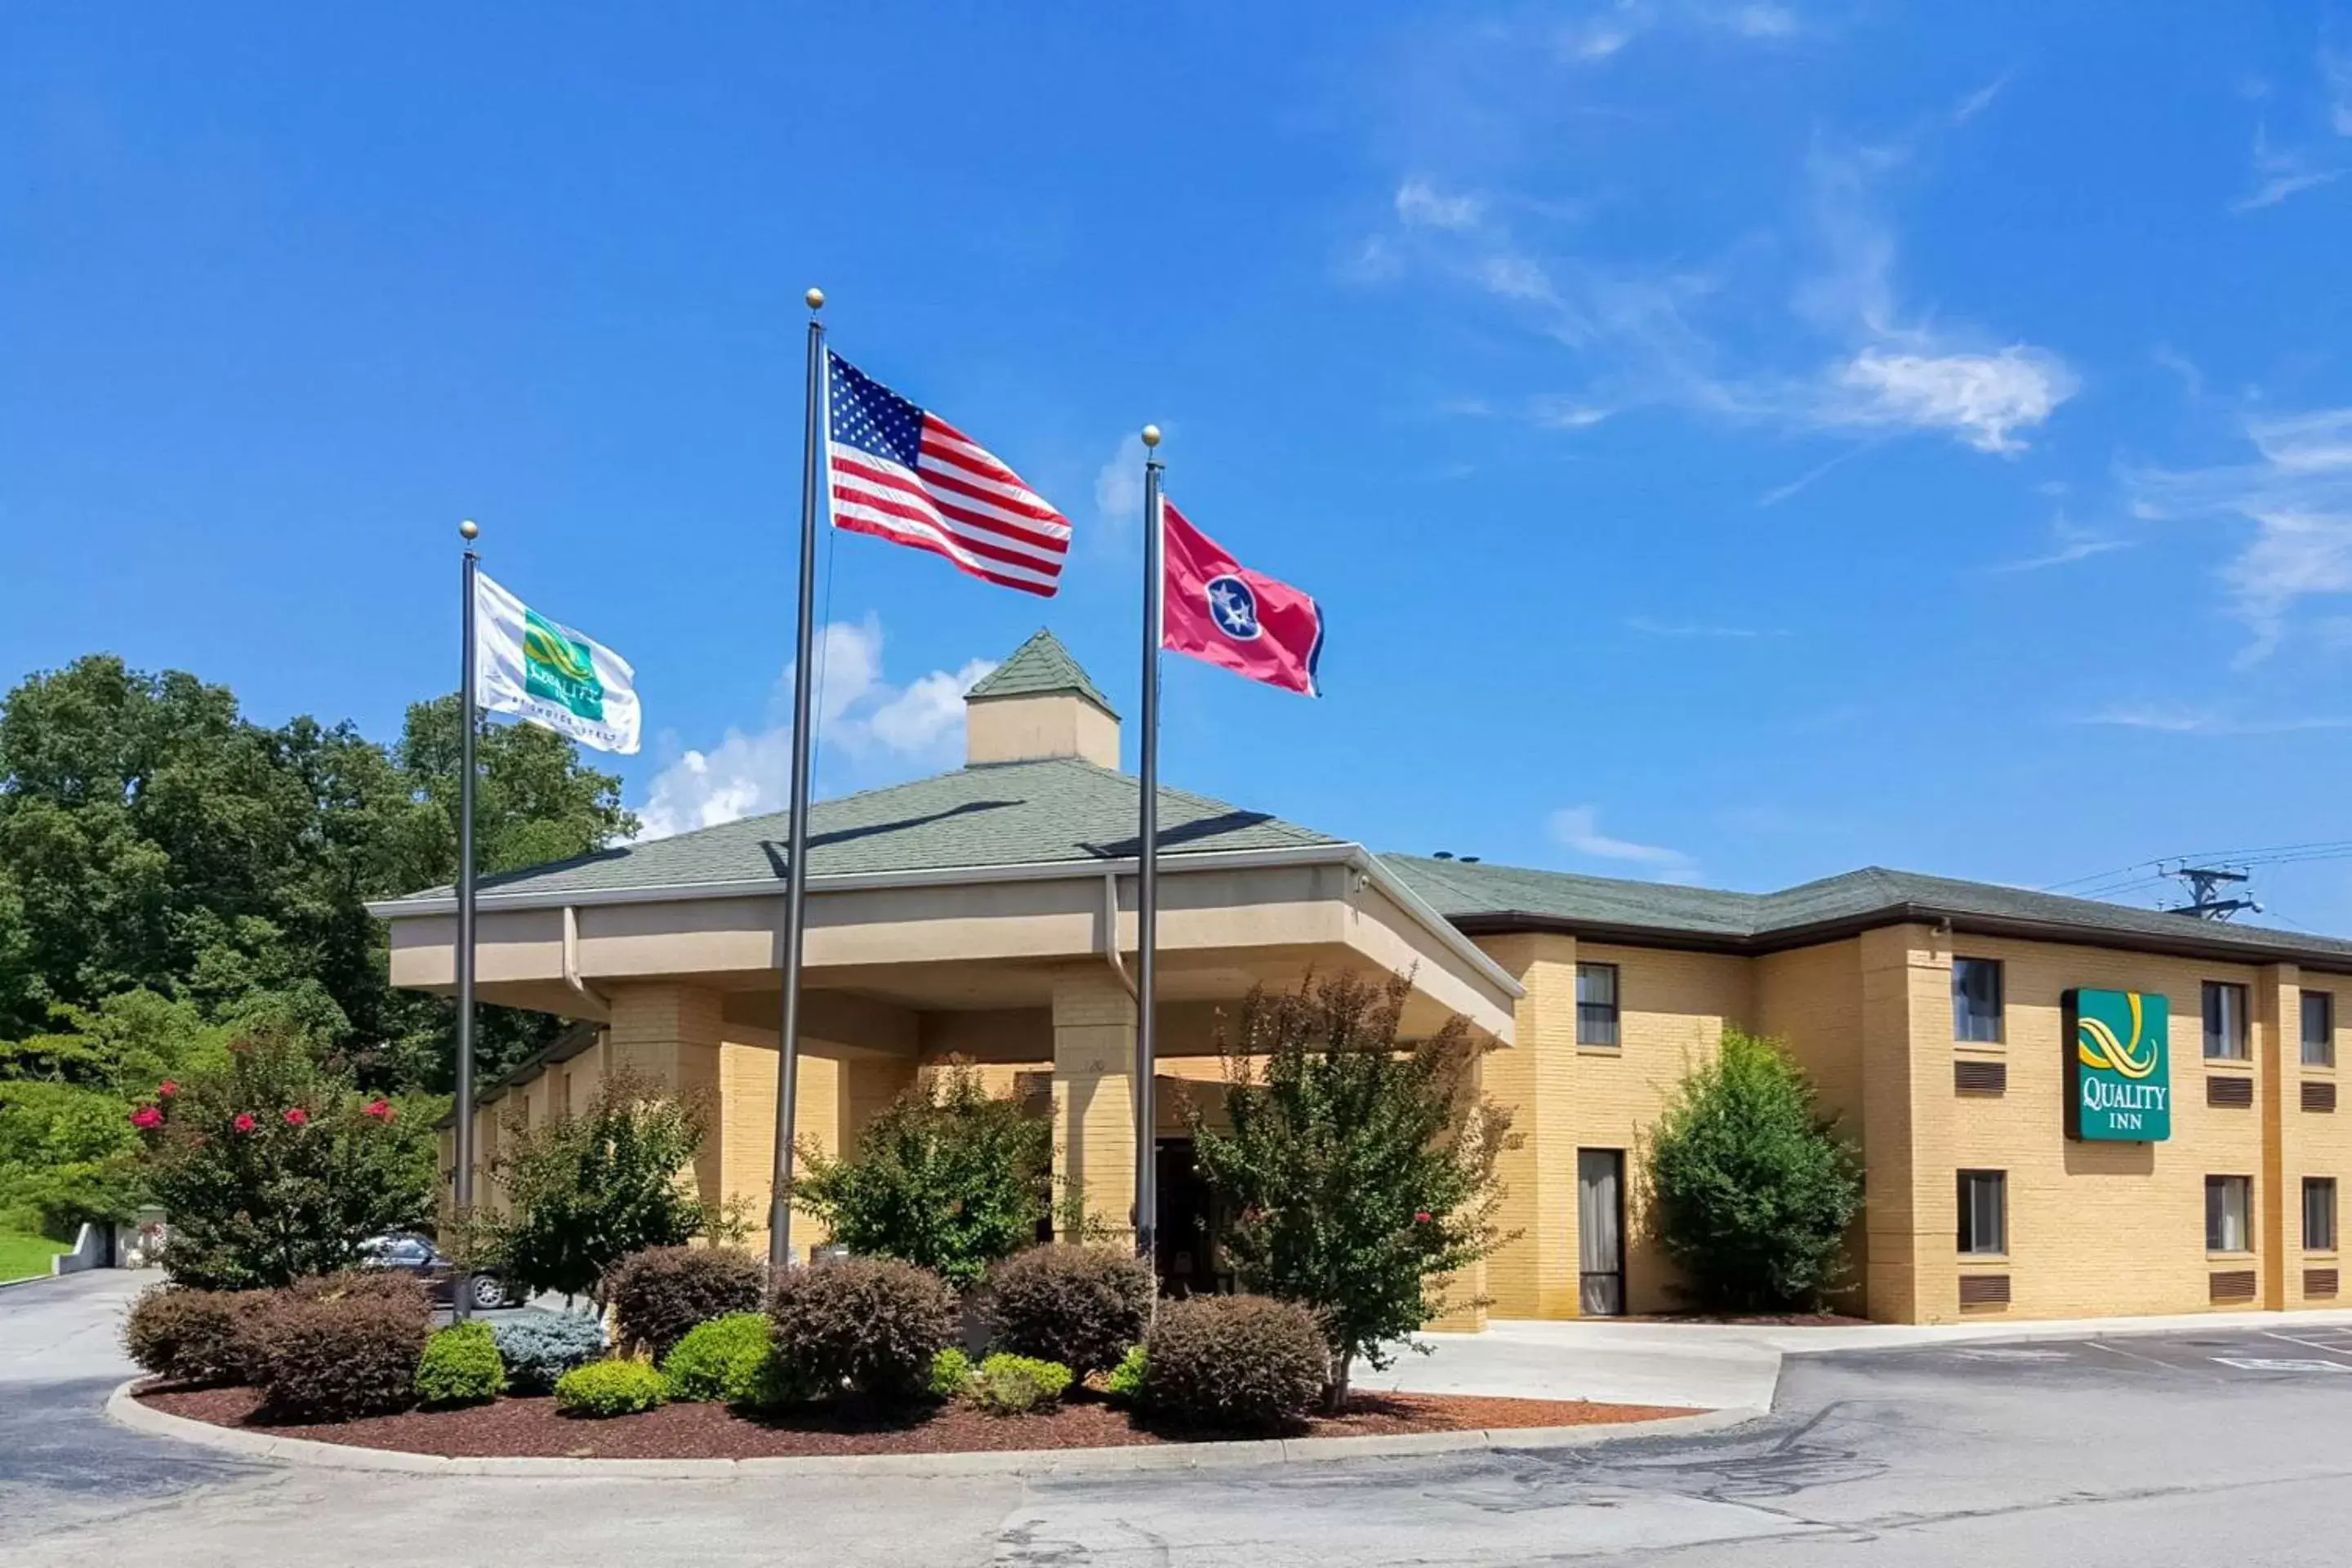 Property Building in Quality Inn - Clinton Knoxville North